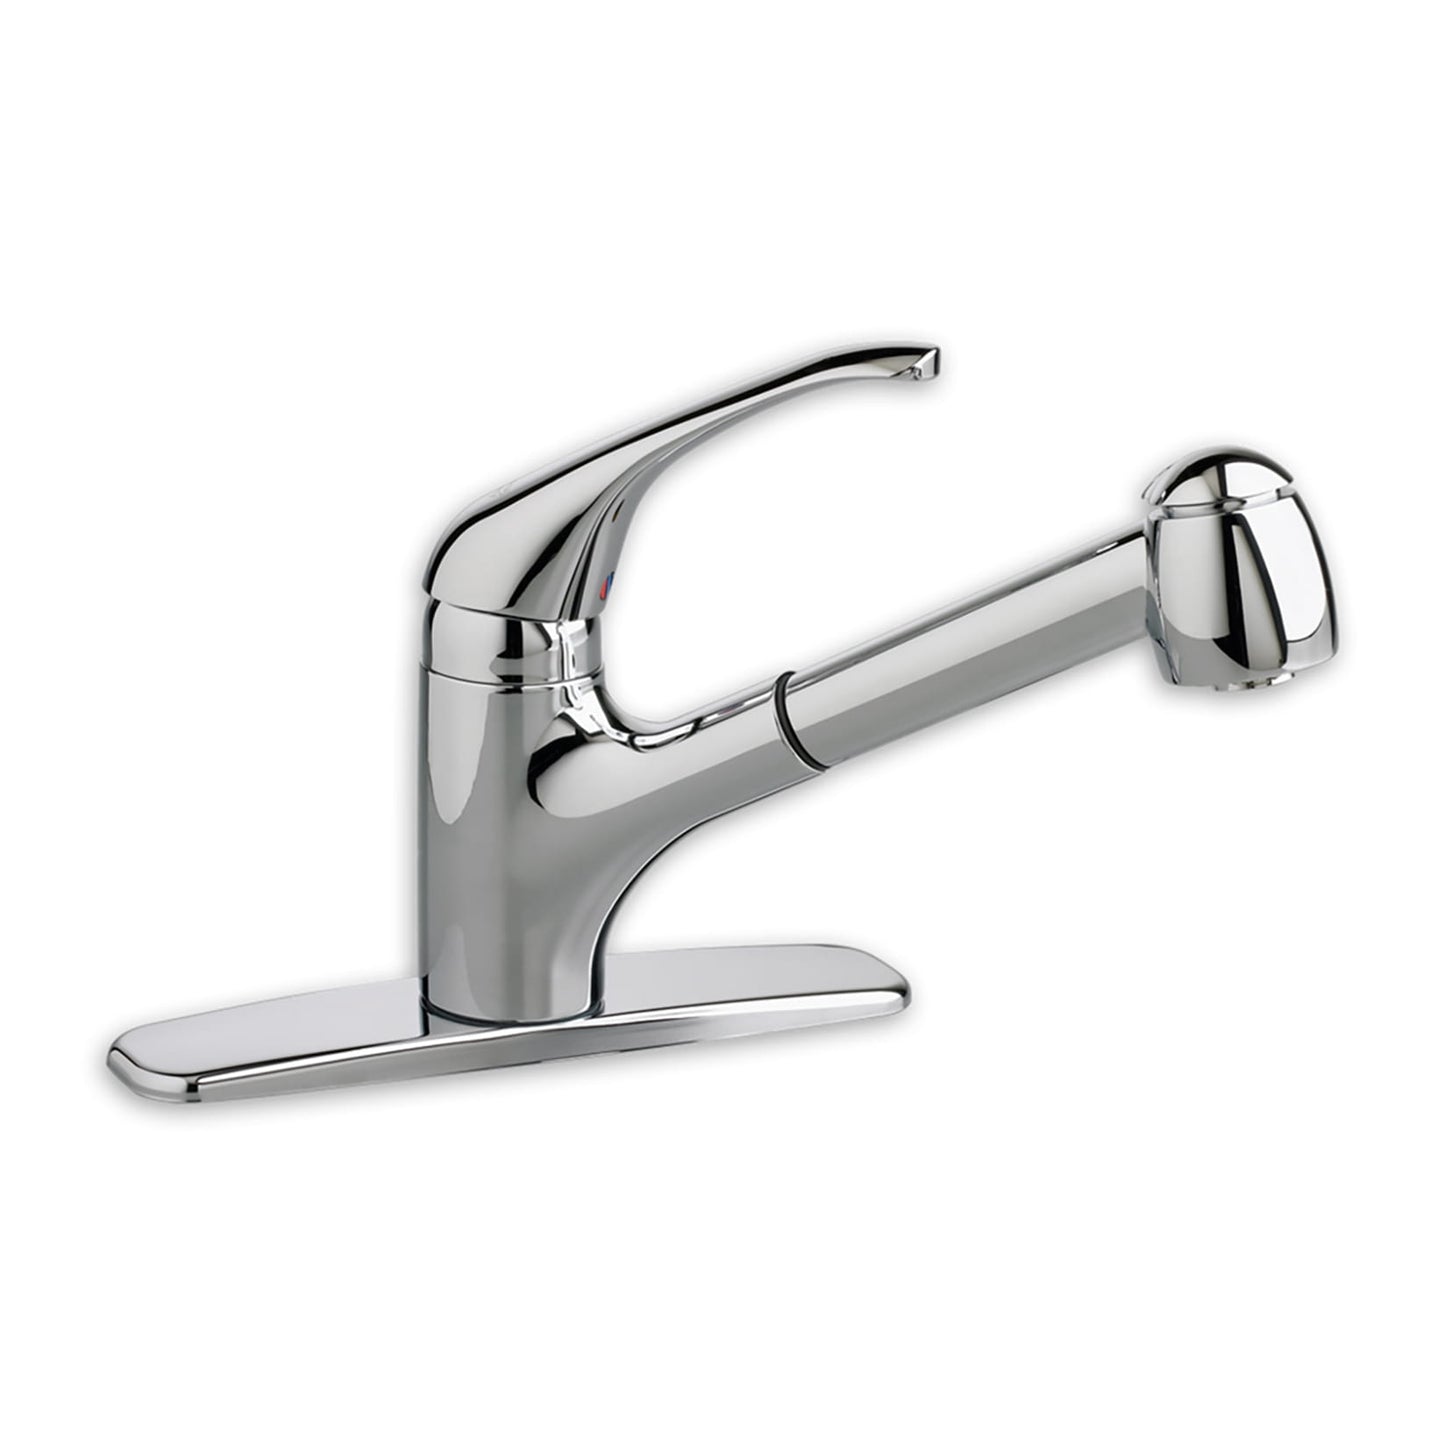 4205104.002 - Reliant + Single-Handle Pull-Out Spray Faucet - 1.5 GPM - Chrome